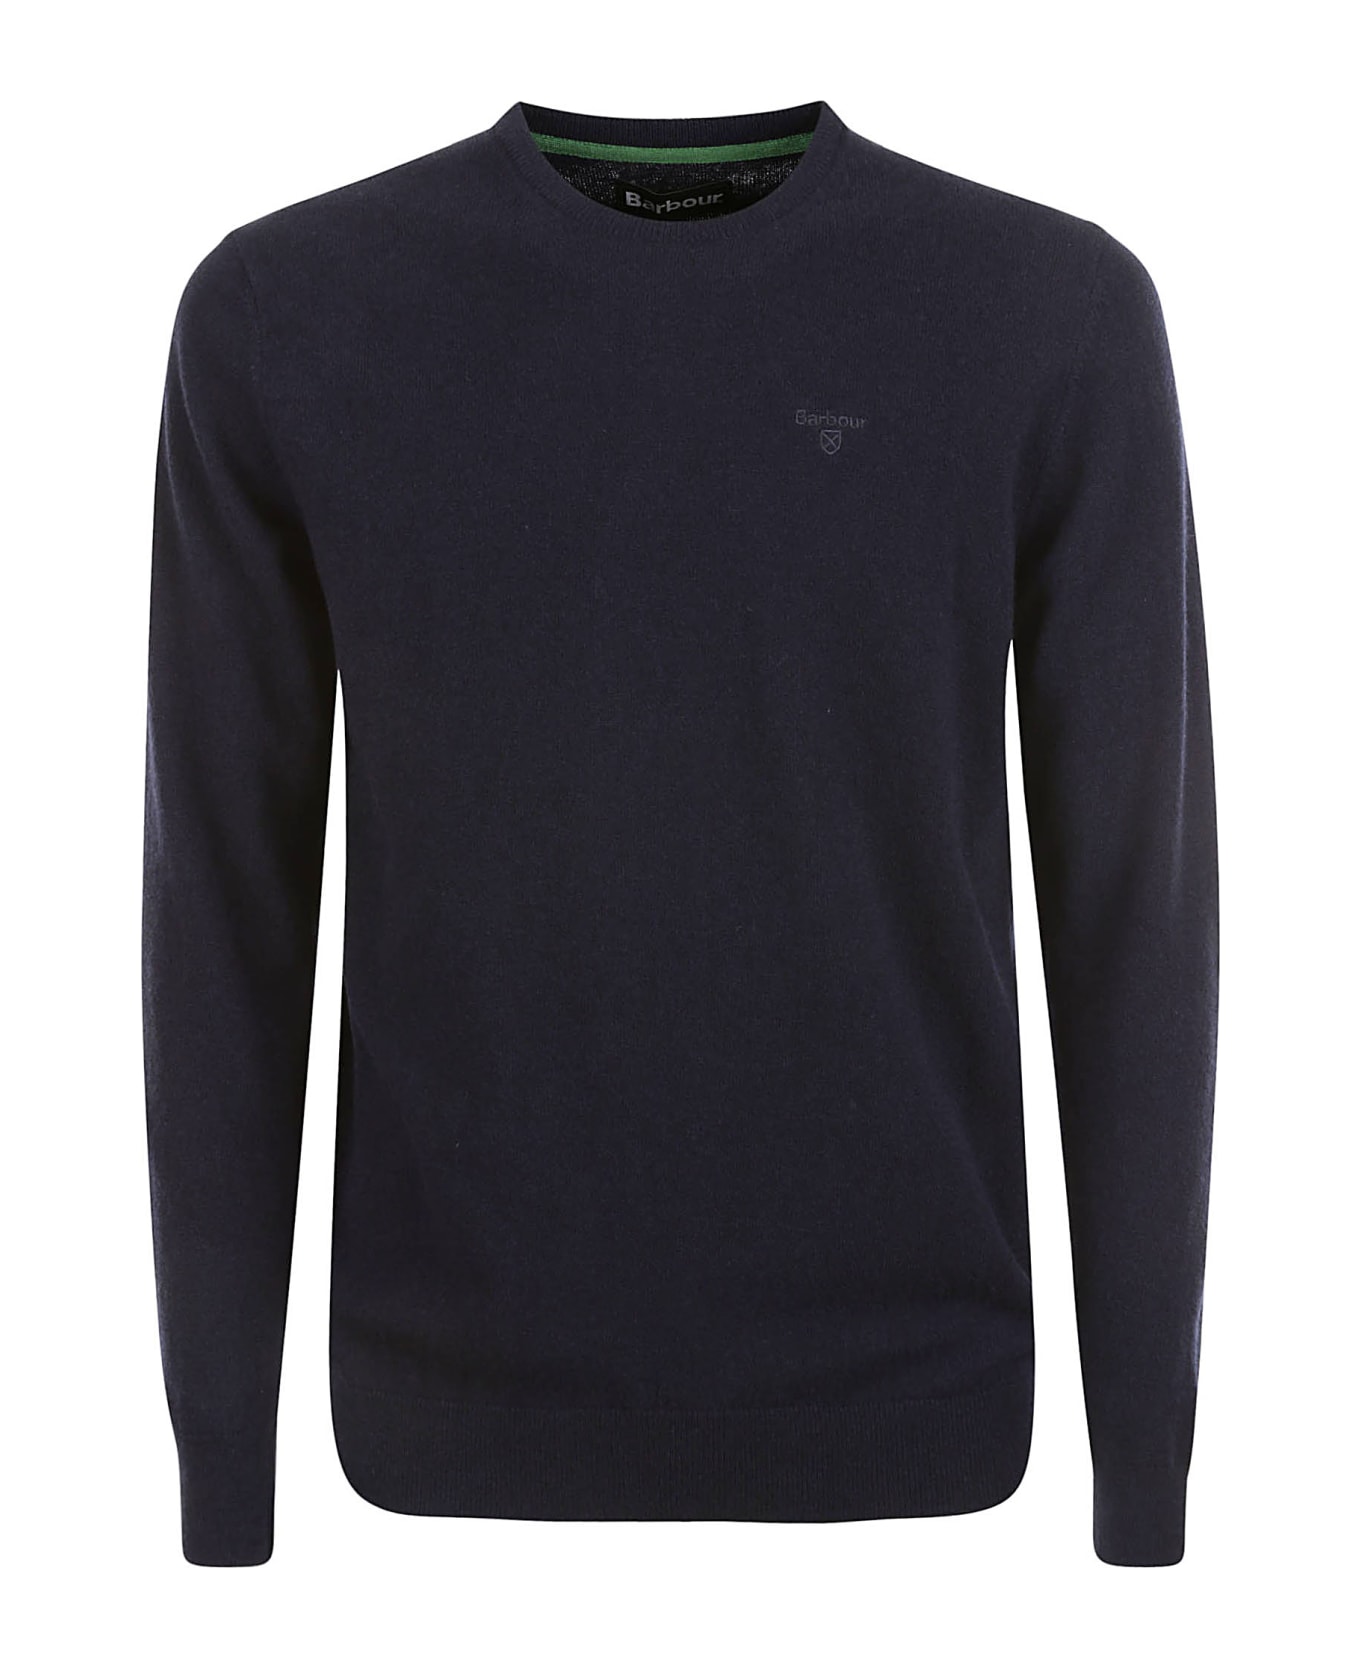 Barbour Logo Embroidered Crewneck Sweater - Navy